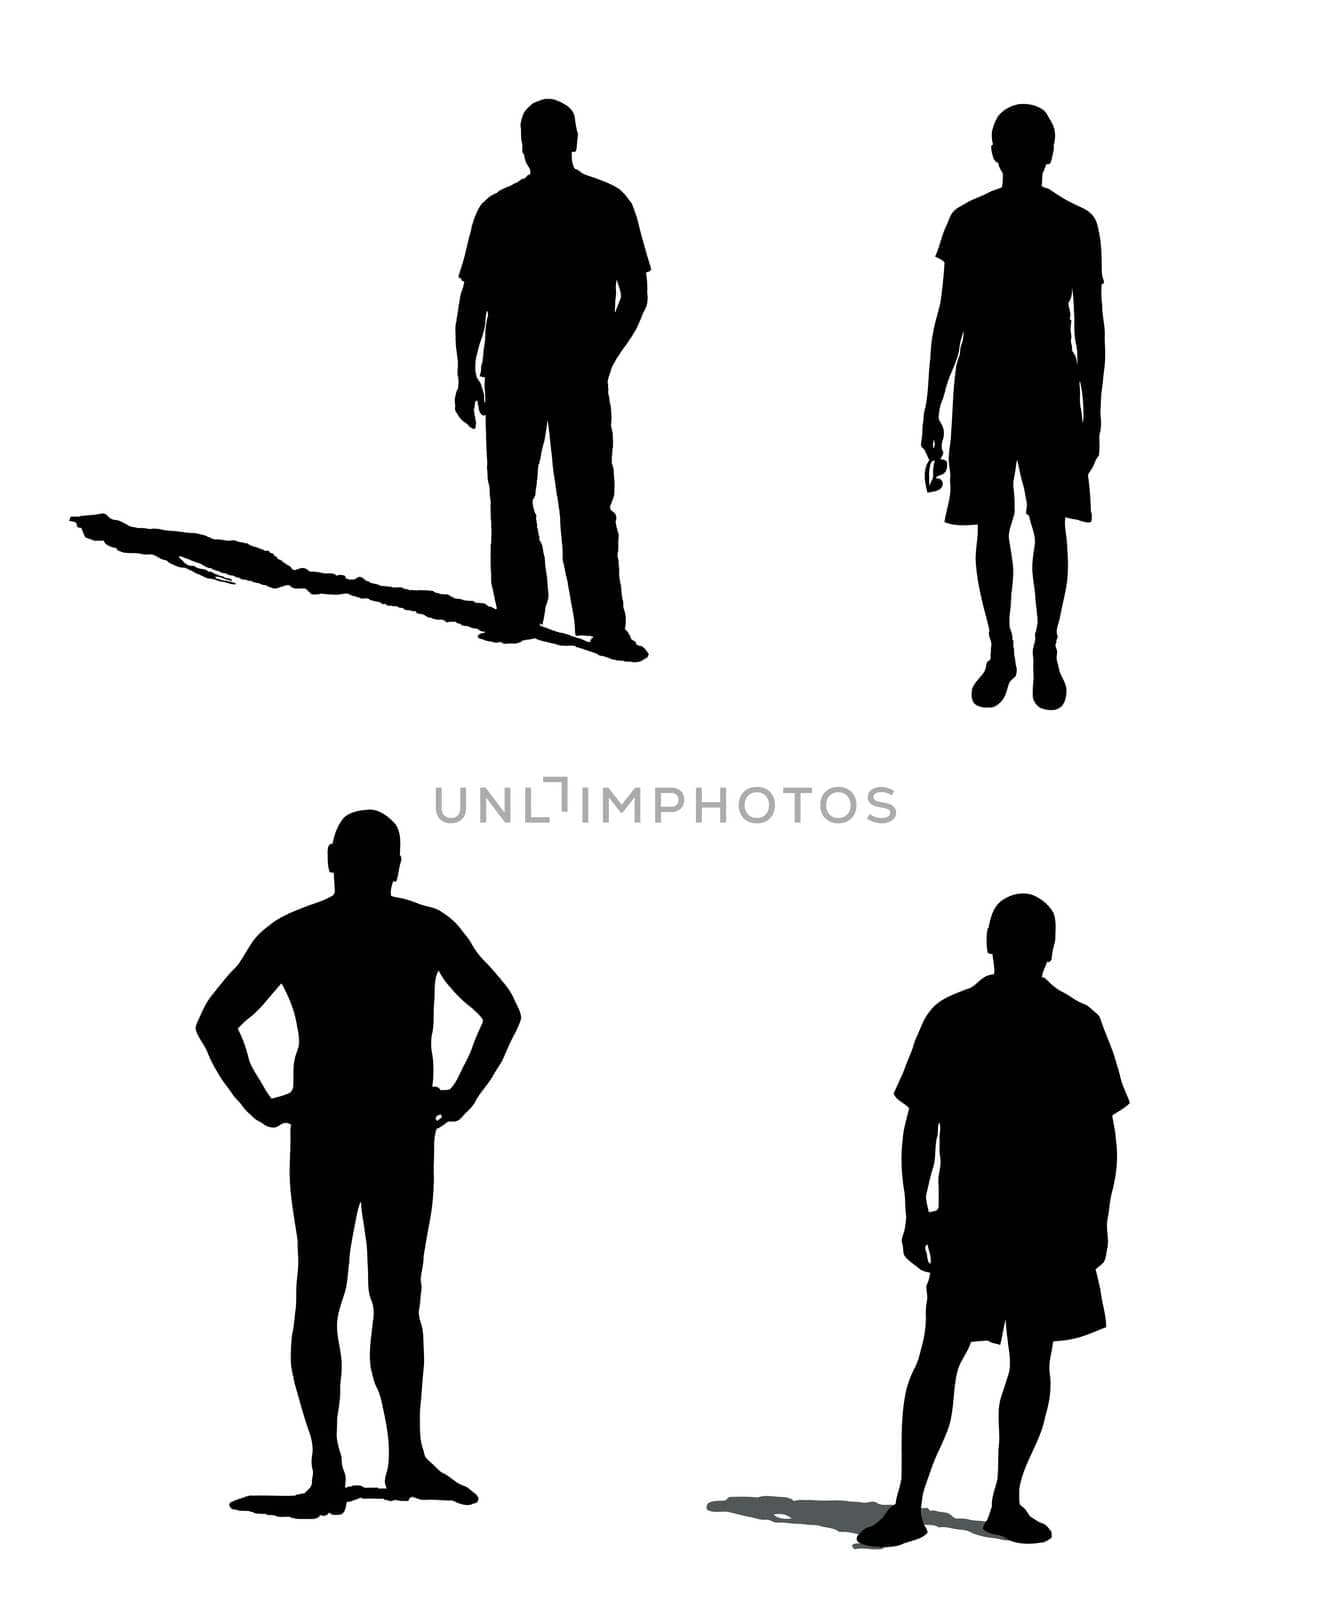 Silhouettes of a mans, isolated on white background.